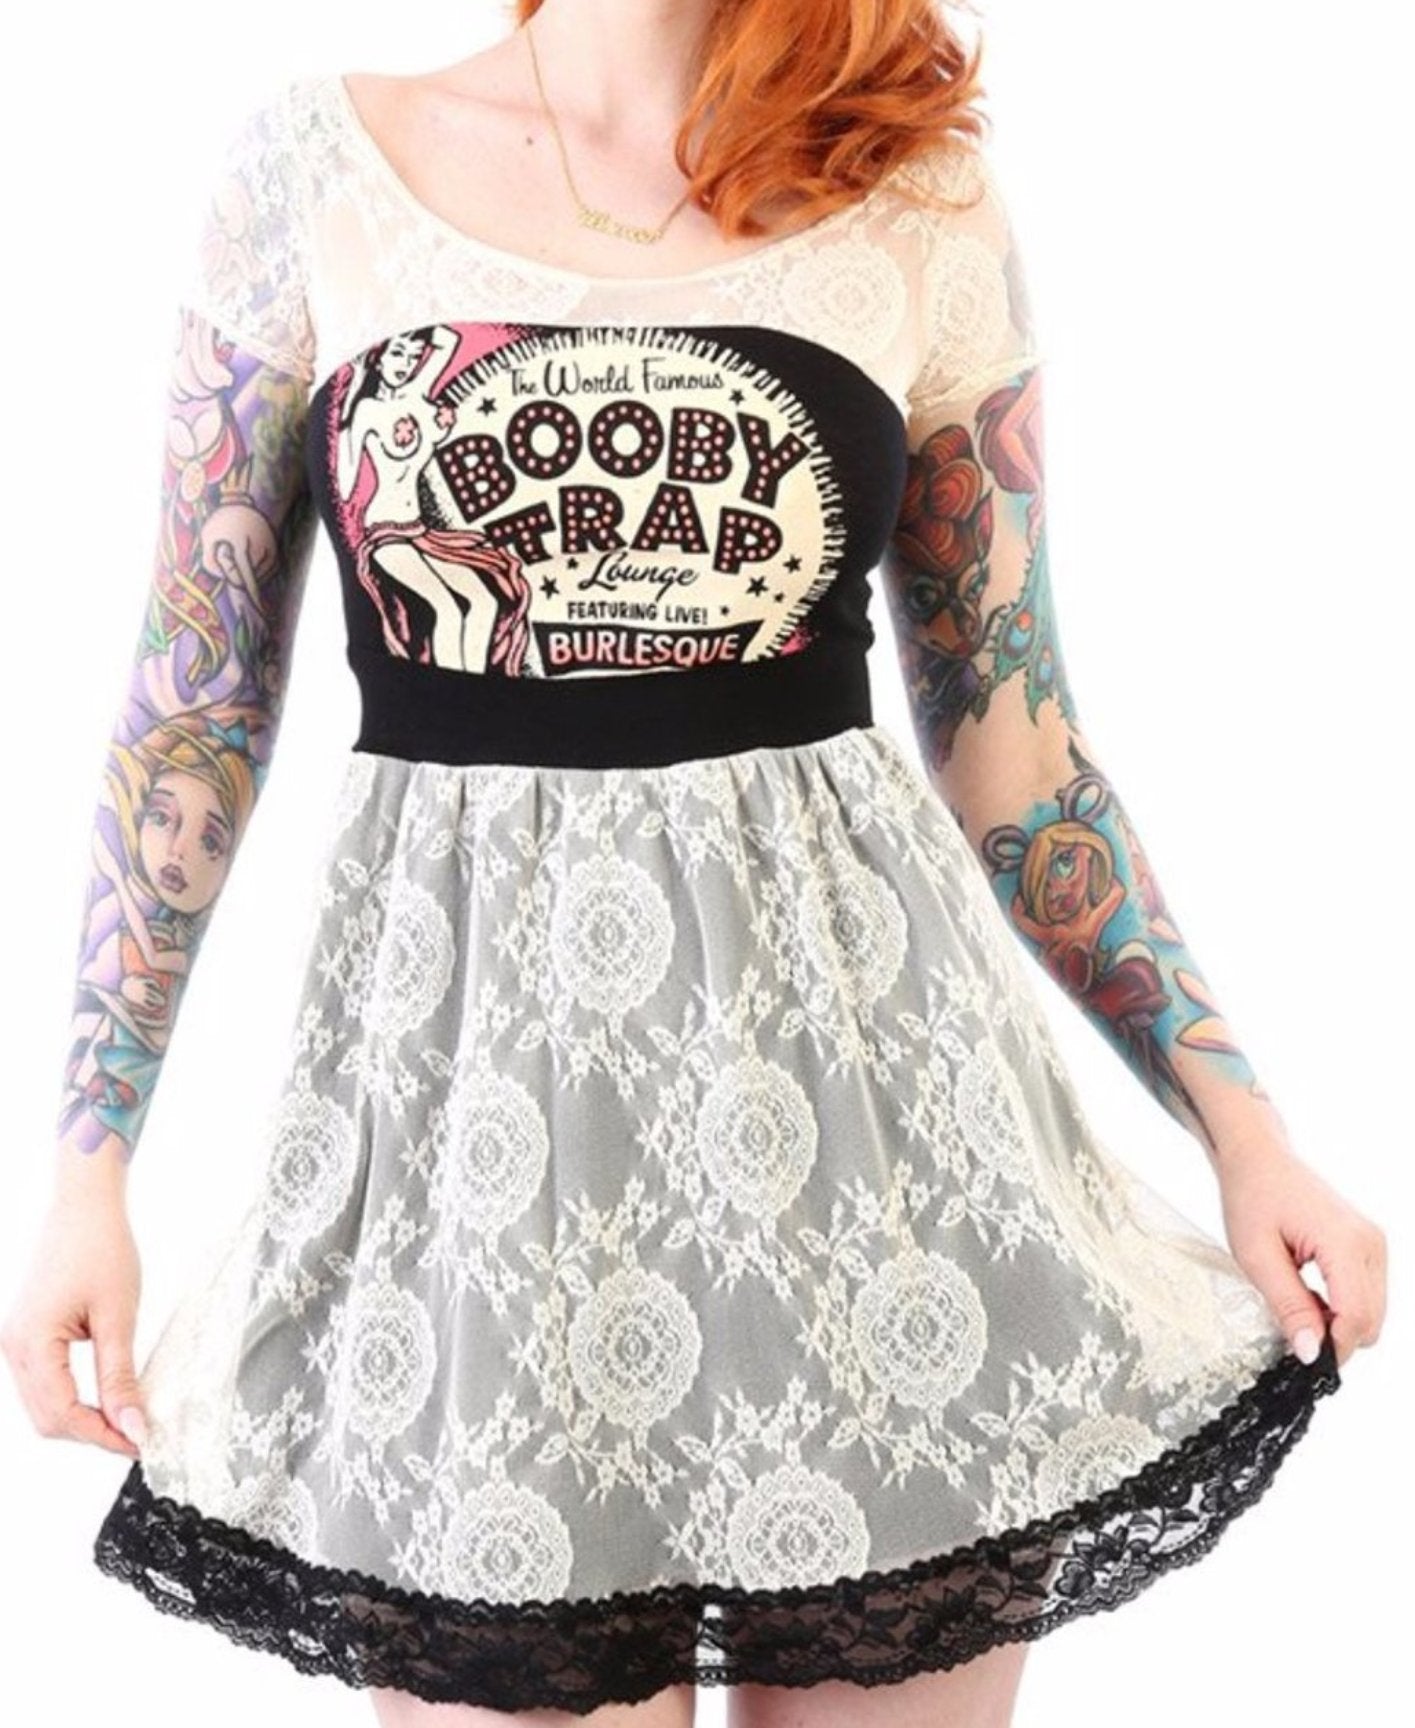 The GO FOR A WHIRL Baby Doll Dress - ONLY SIZES SM & MD LEFT!